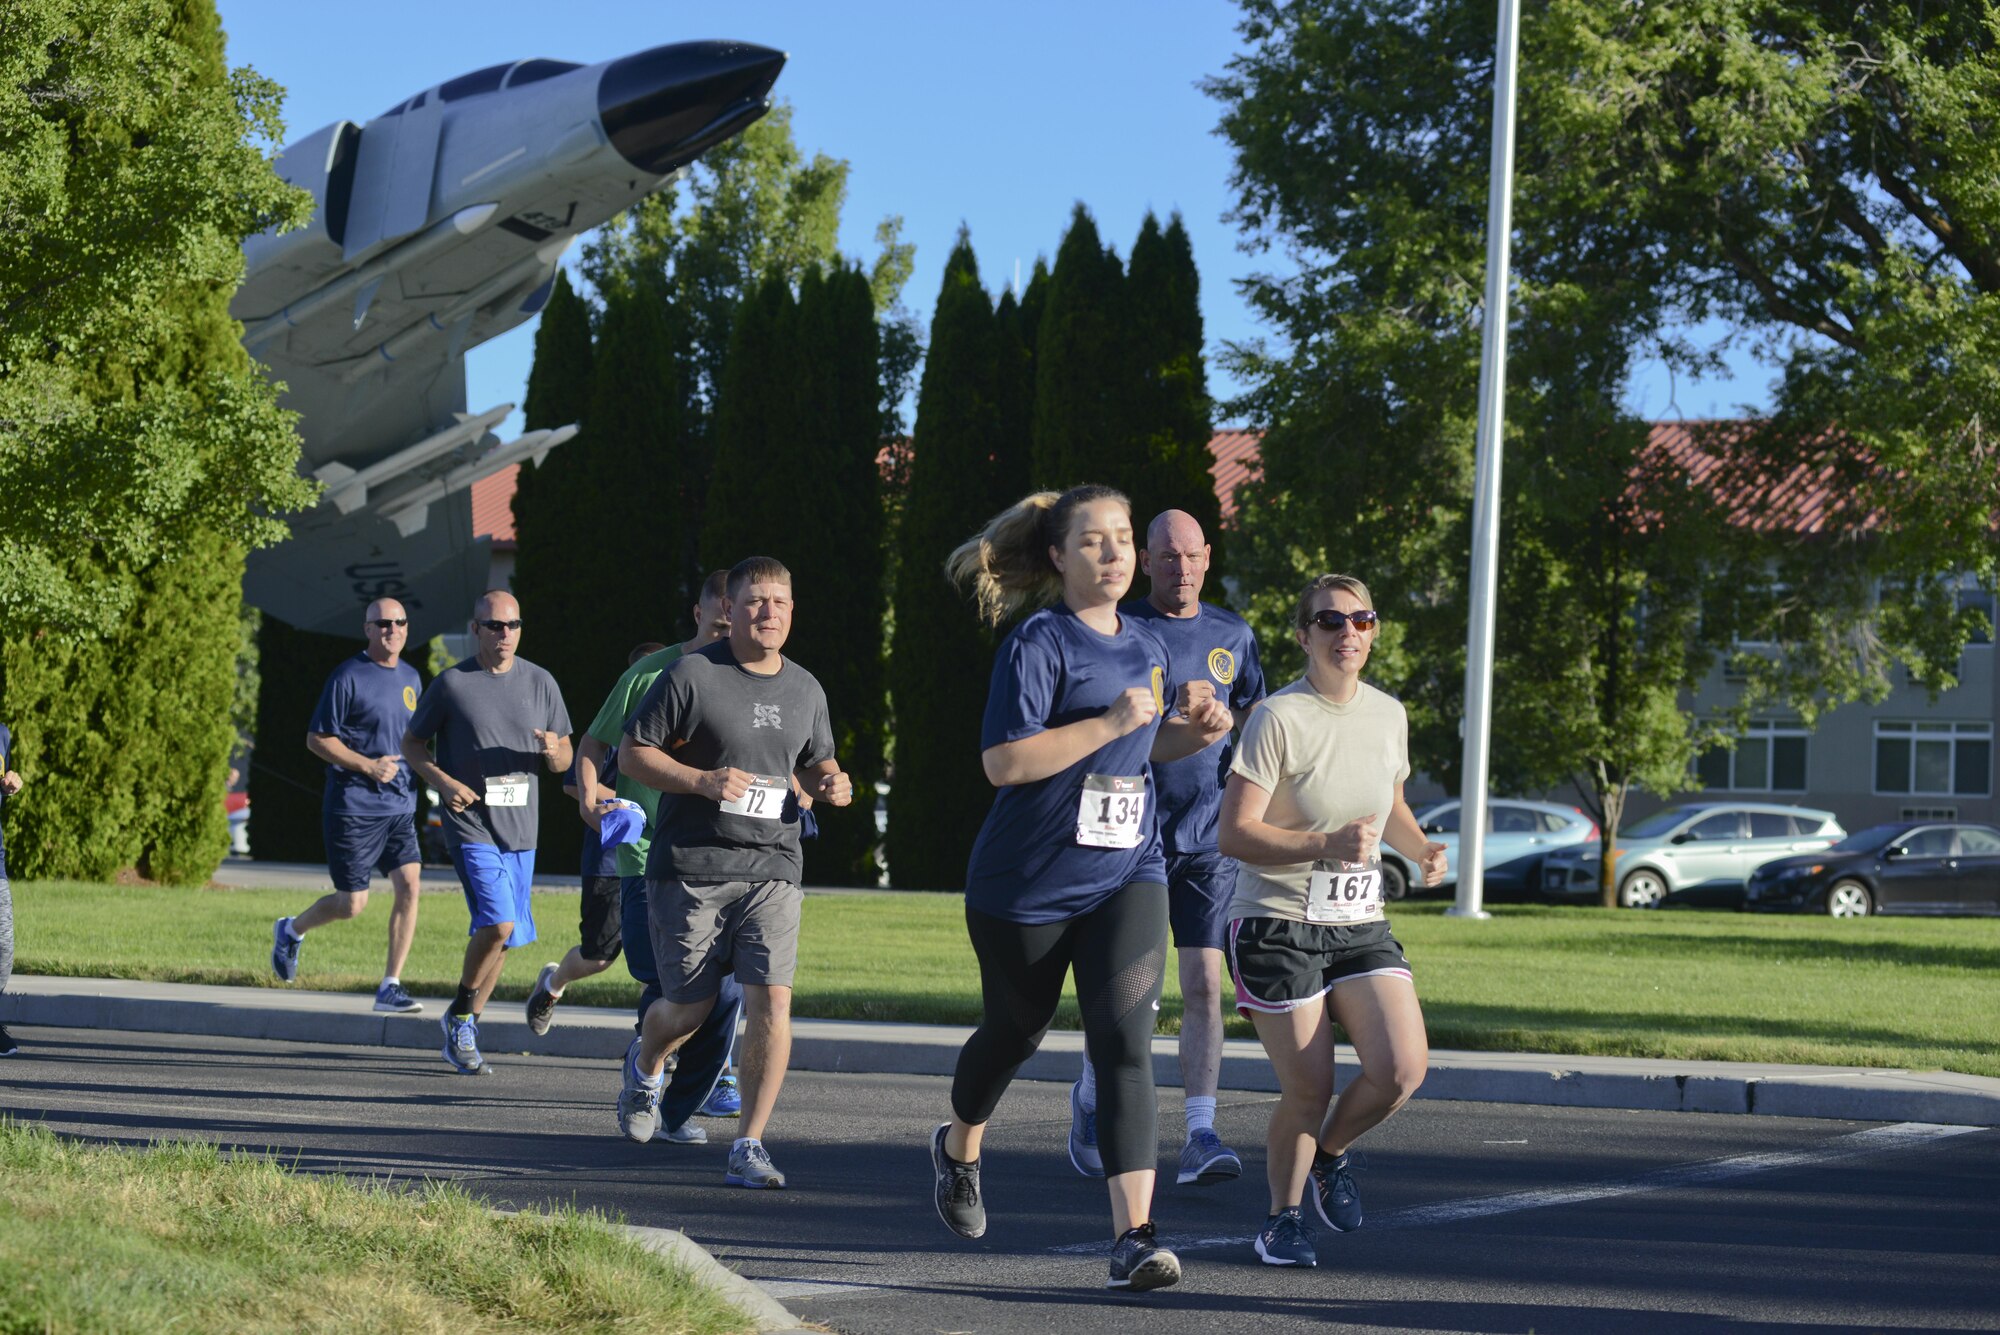 Kingsley Field members compete in the Sentry Eagle 5K run/walk July 20, 2017, at Kingsley Field in Klamath Falls, Ore. The race was also part of the Blue Zones Project ribbon cutting ceremony which designated Kingsley Field as a Blue Zones Project Approved Worksite and was followed by the Sentry Eagle 5K run/walk. The Blue Zones Project encourages changes in communities that lead to healthier options. (U.S. Air National Guard photo by Staff Sgt. Riley Johnson)